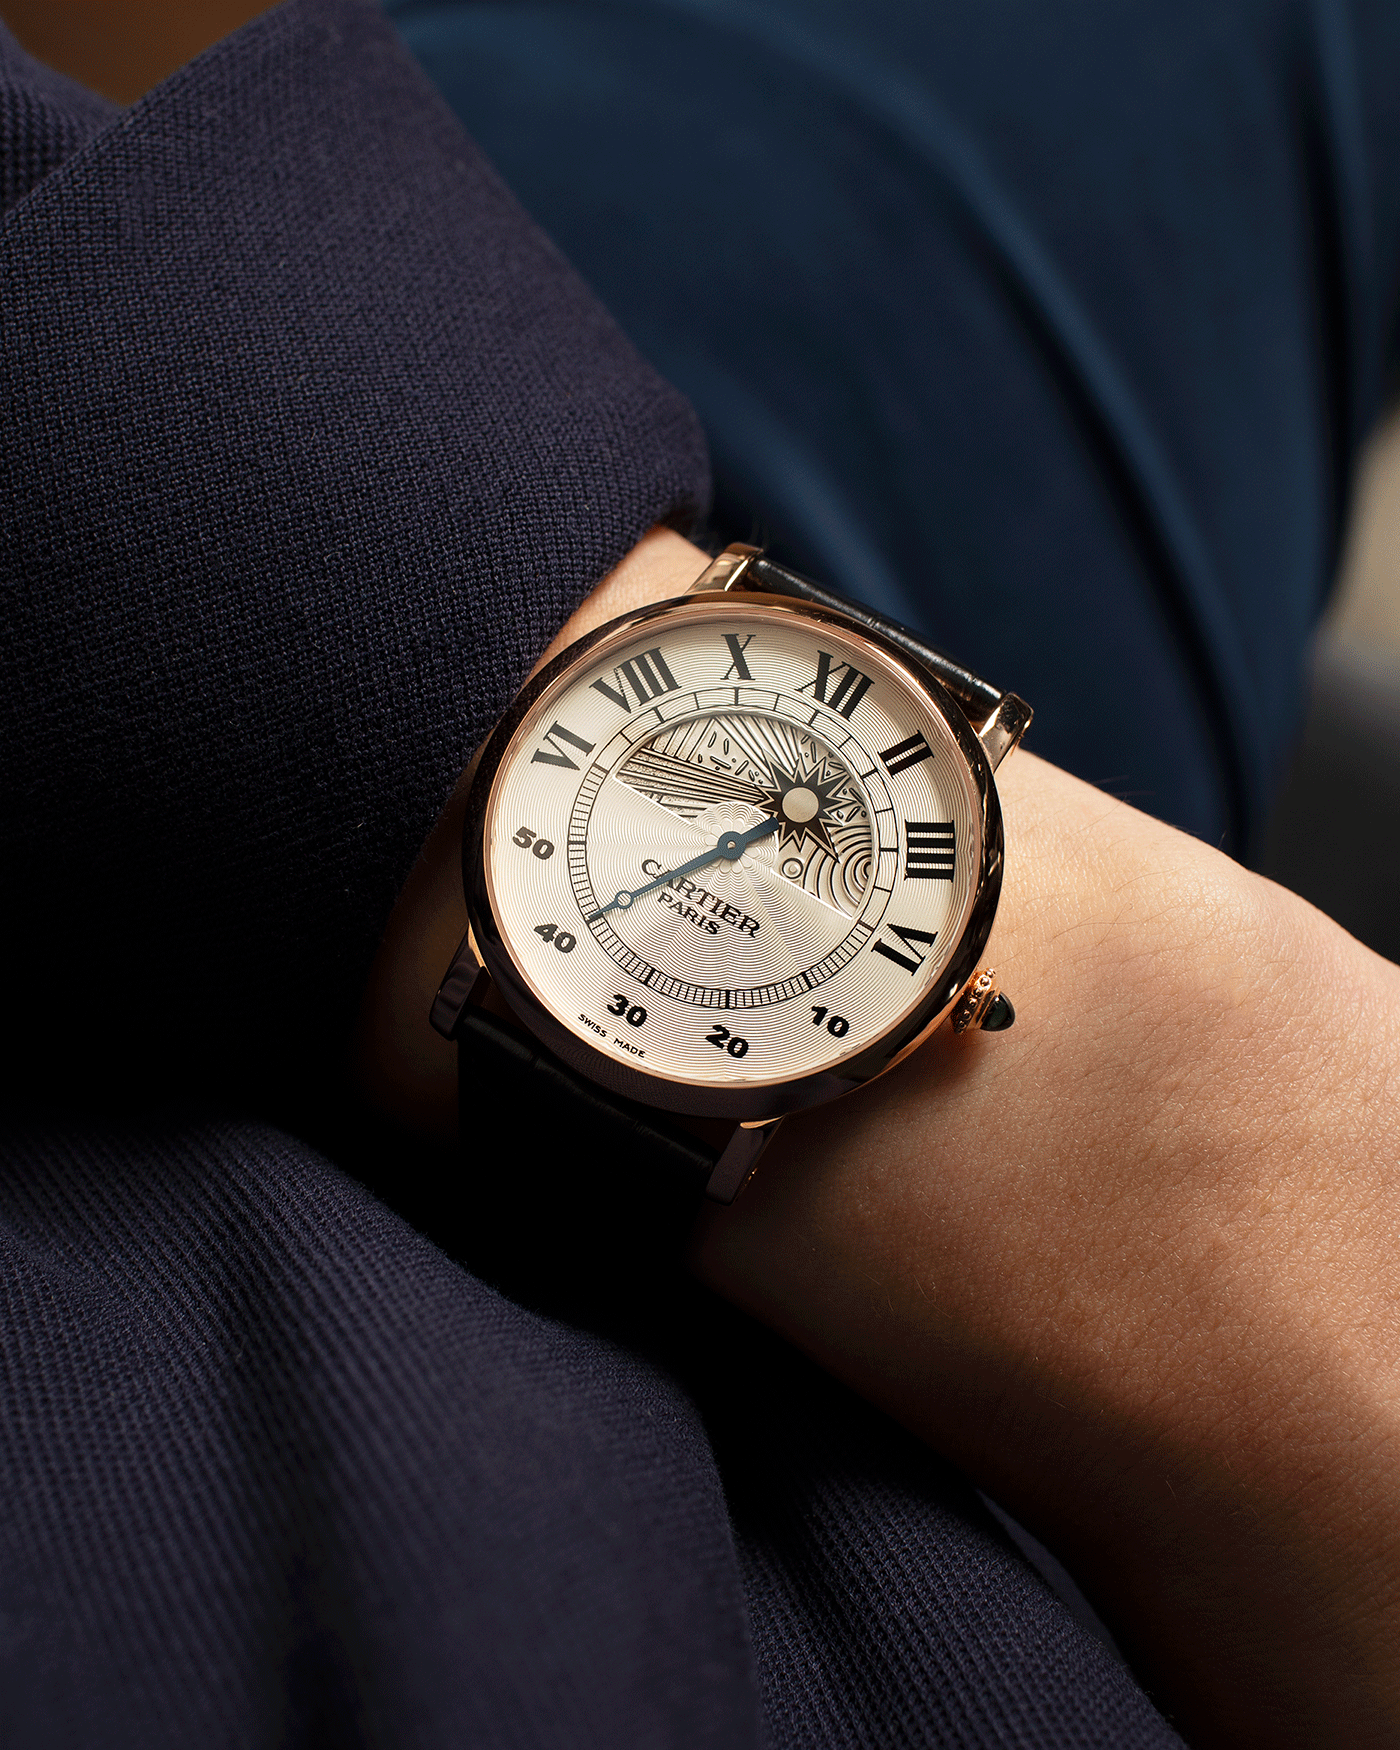 Brand: Cartier Year: 2000’s Model: CPCP Rotonde Jour Et Nuit Reference: 28721 Material: 18k Rose Gold Movement: Cal. 9903 MC Case Diameter: 42mm Strap: Black Cartier Alligator Strap with 18k Rose Gold Deployant